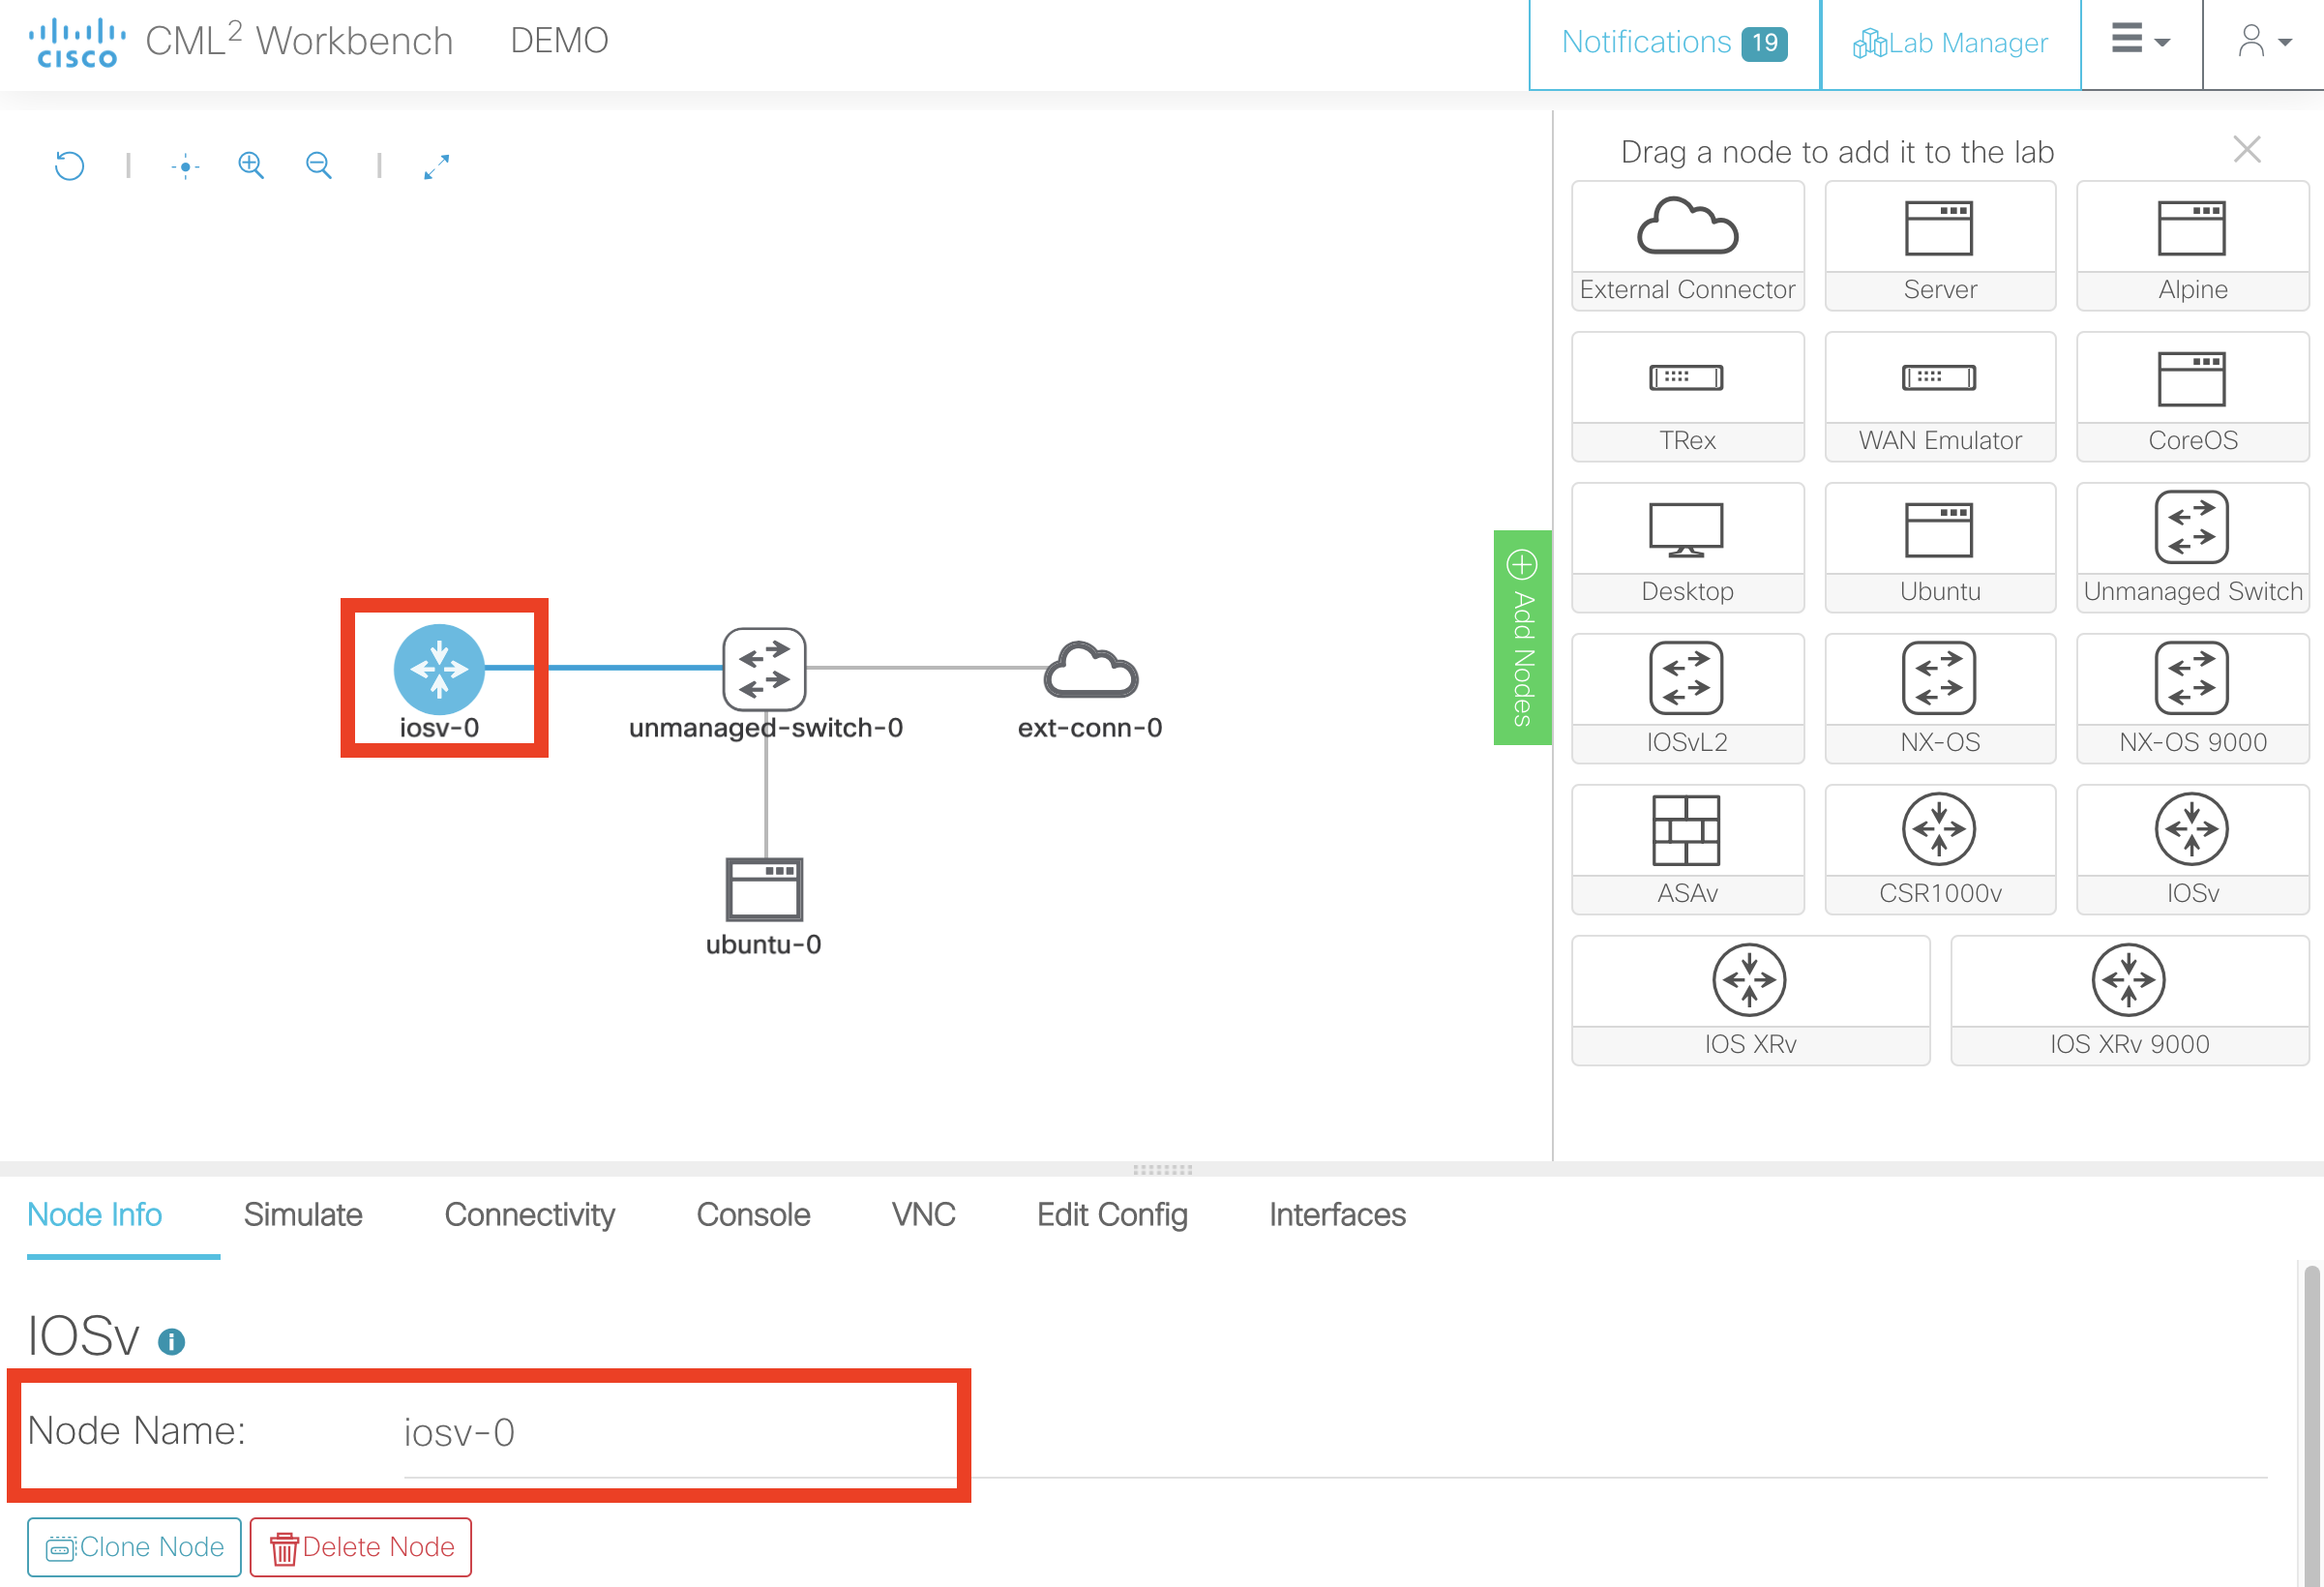 Design Your First Network with Cisco Modeling Lab